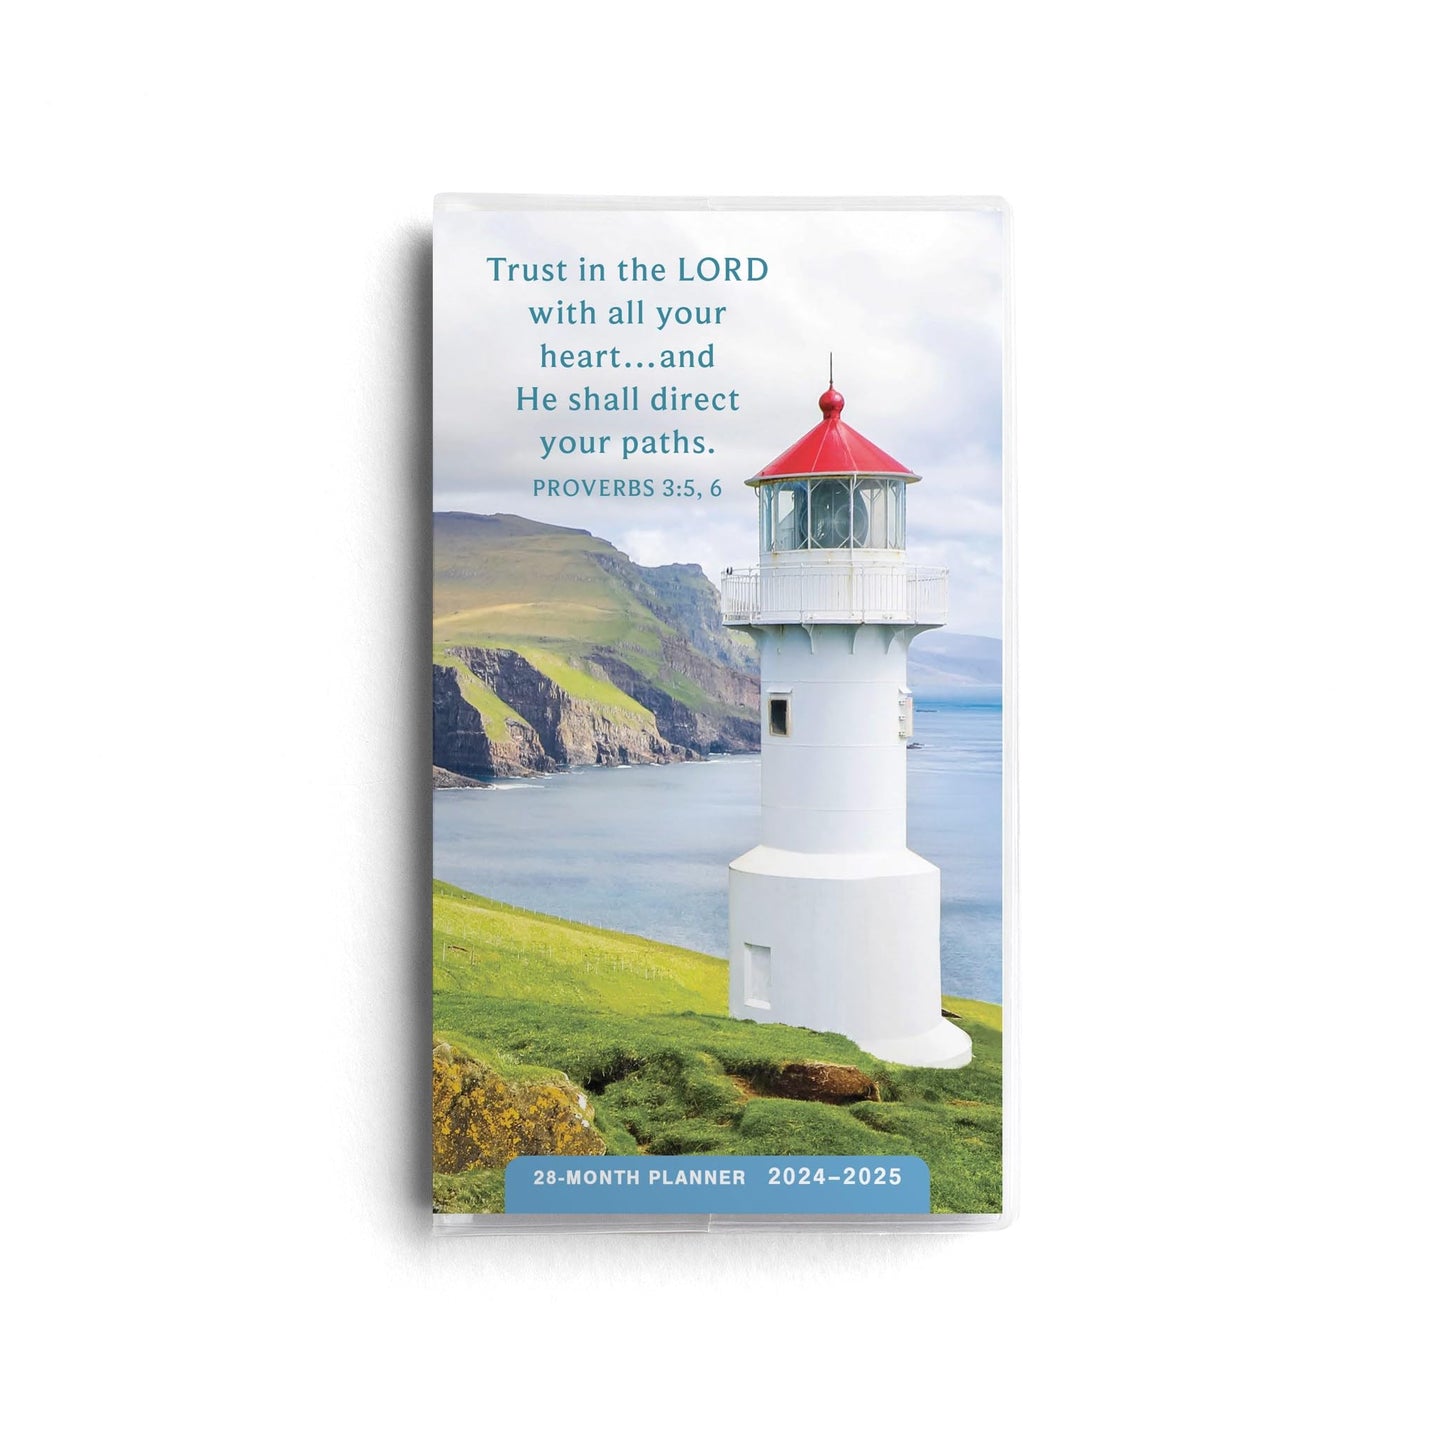 Trust in the Lord 2024 – 2025 Lighthouse Planner - 28-Month - 2 Year Pocket Calendar